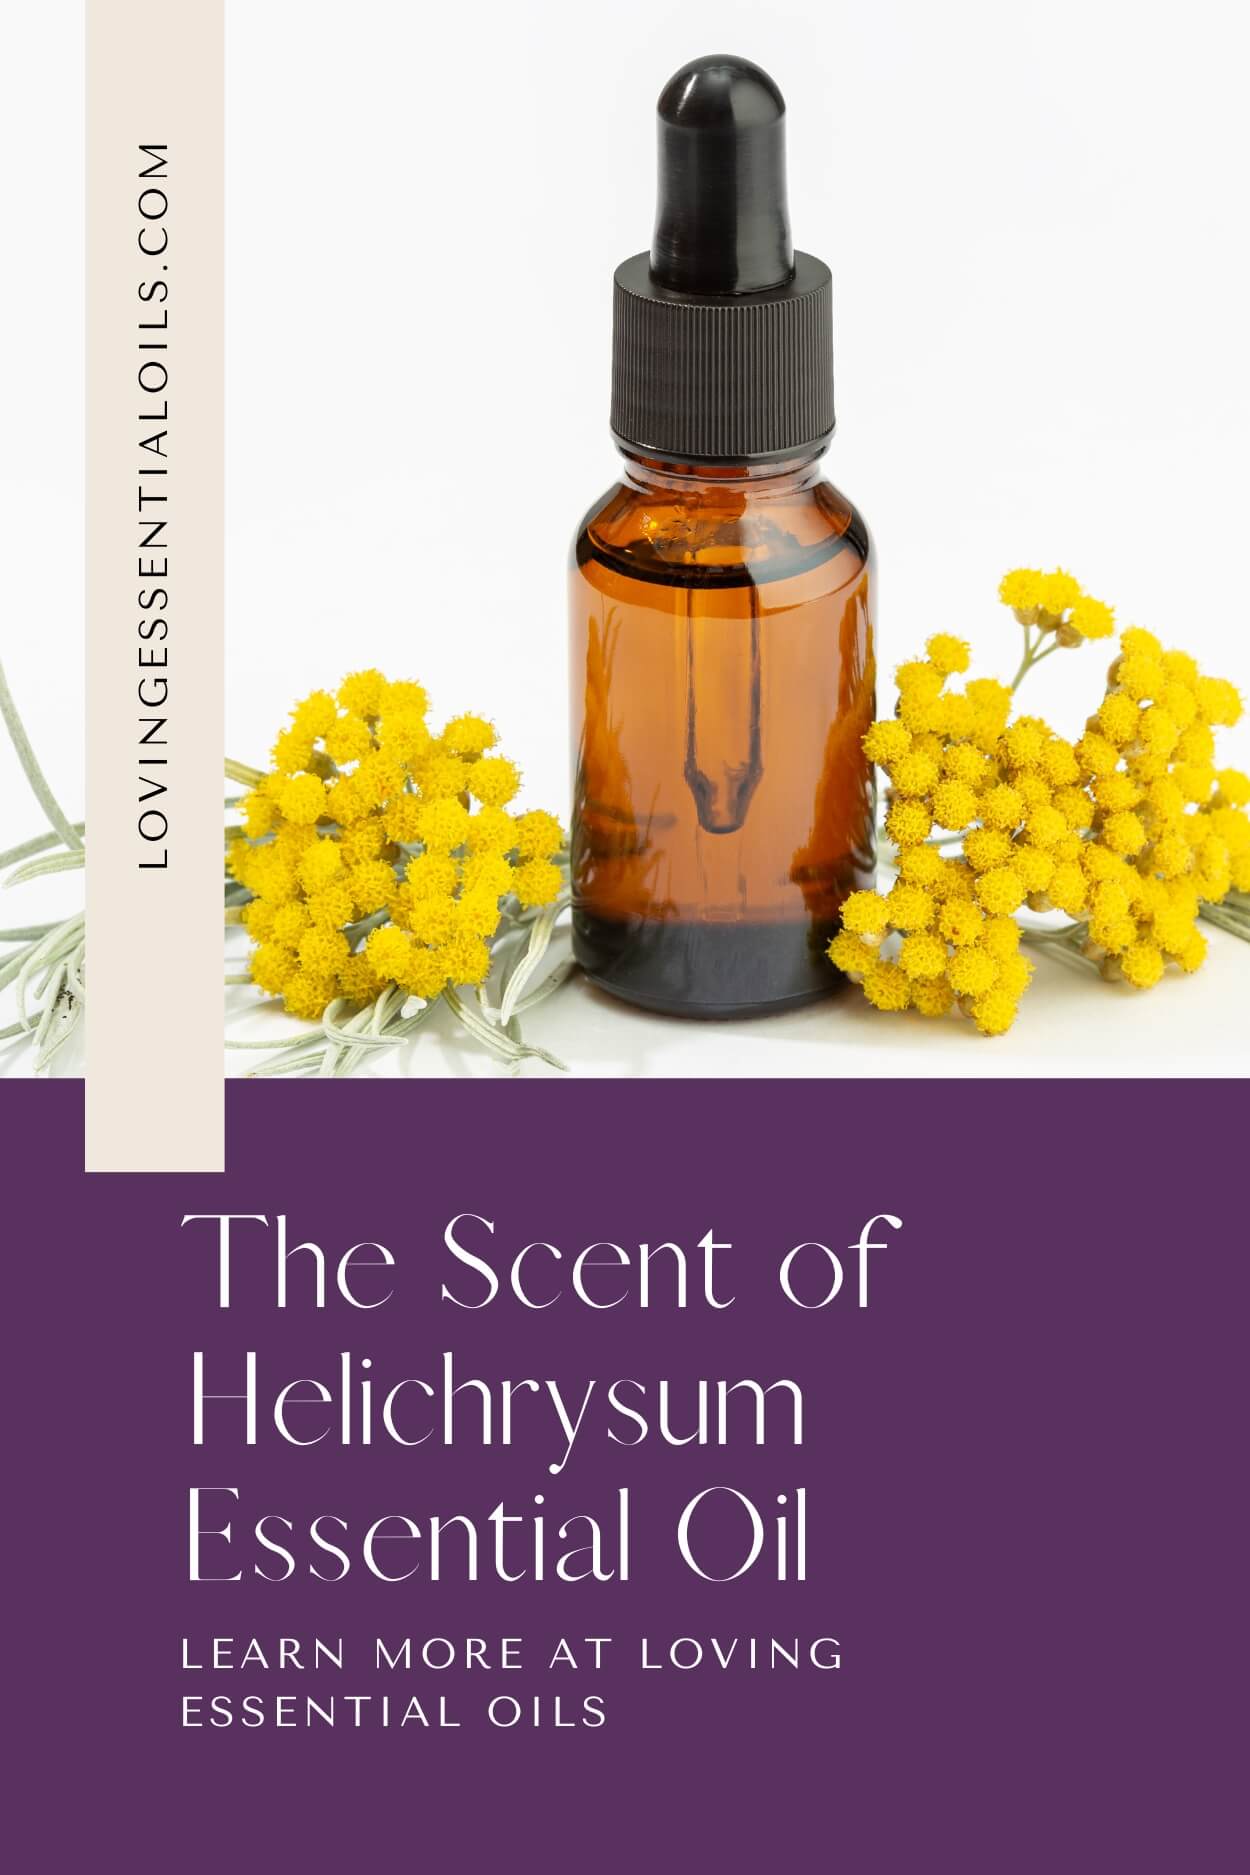 The Scent of Helichrysum Essential Oil by Loving Essential Oils